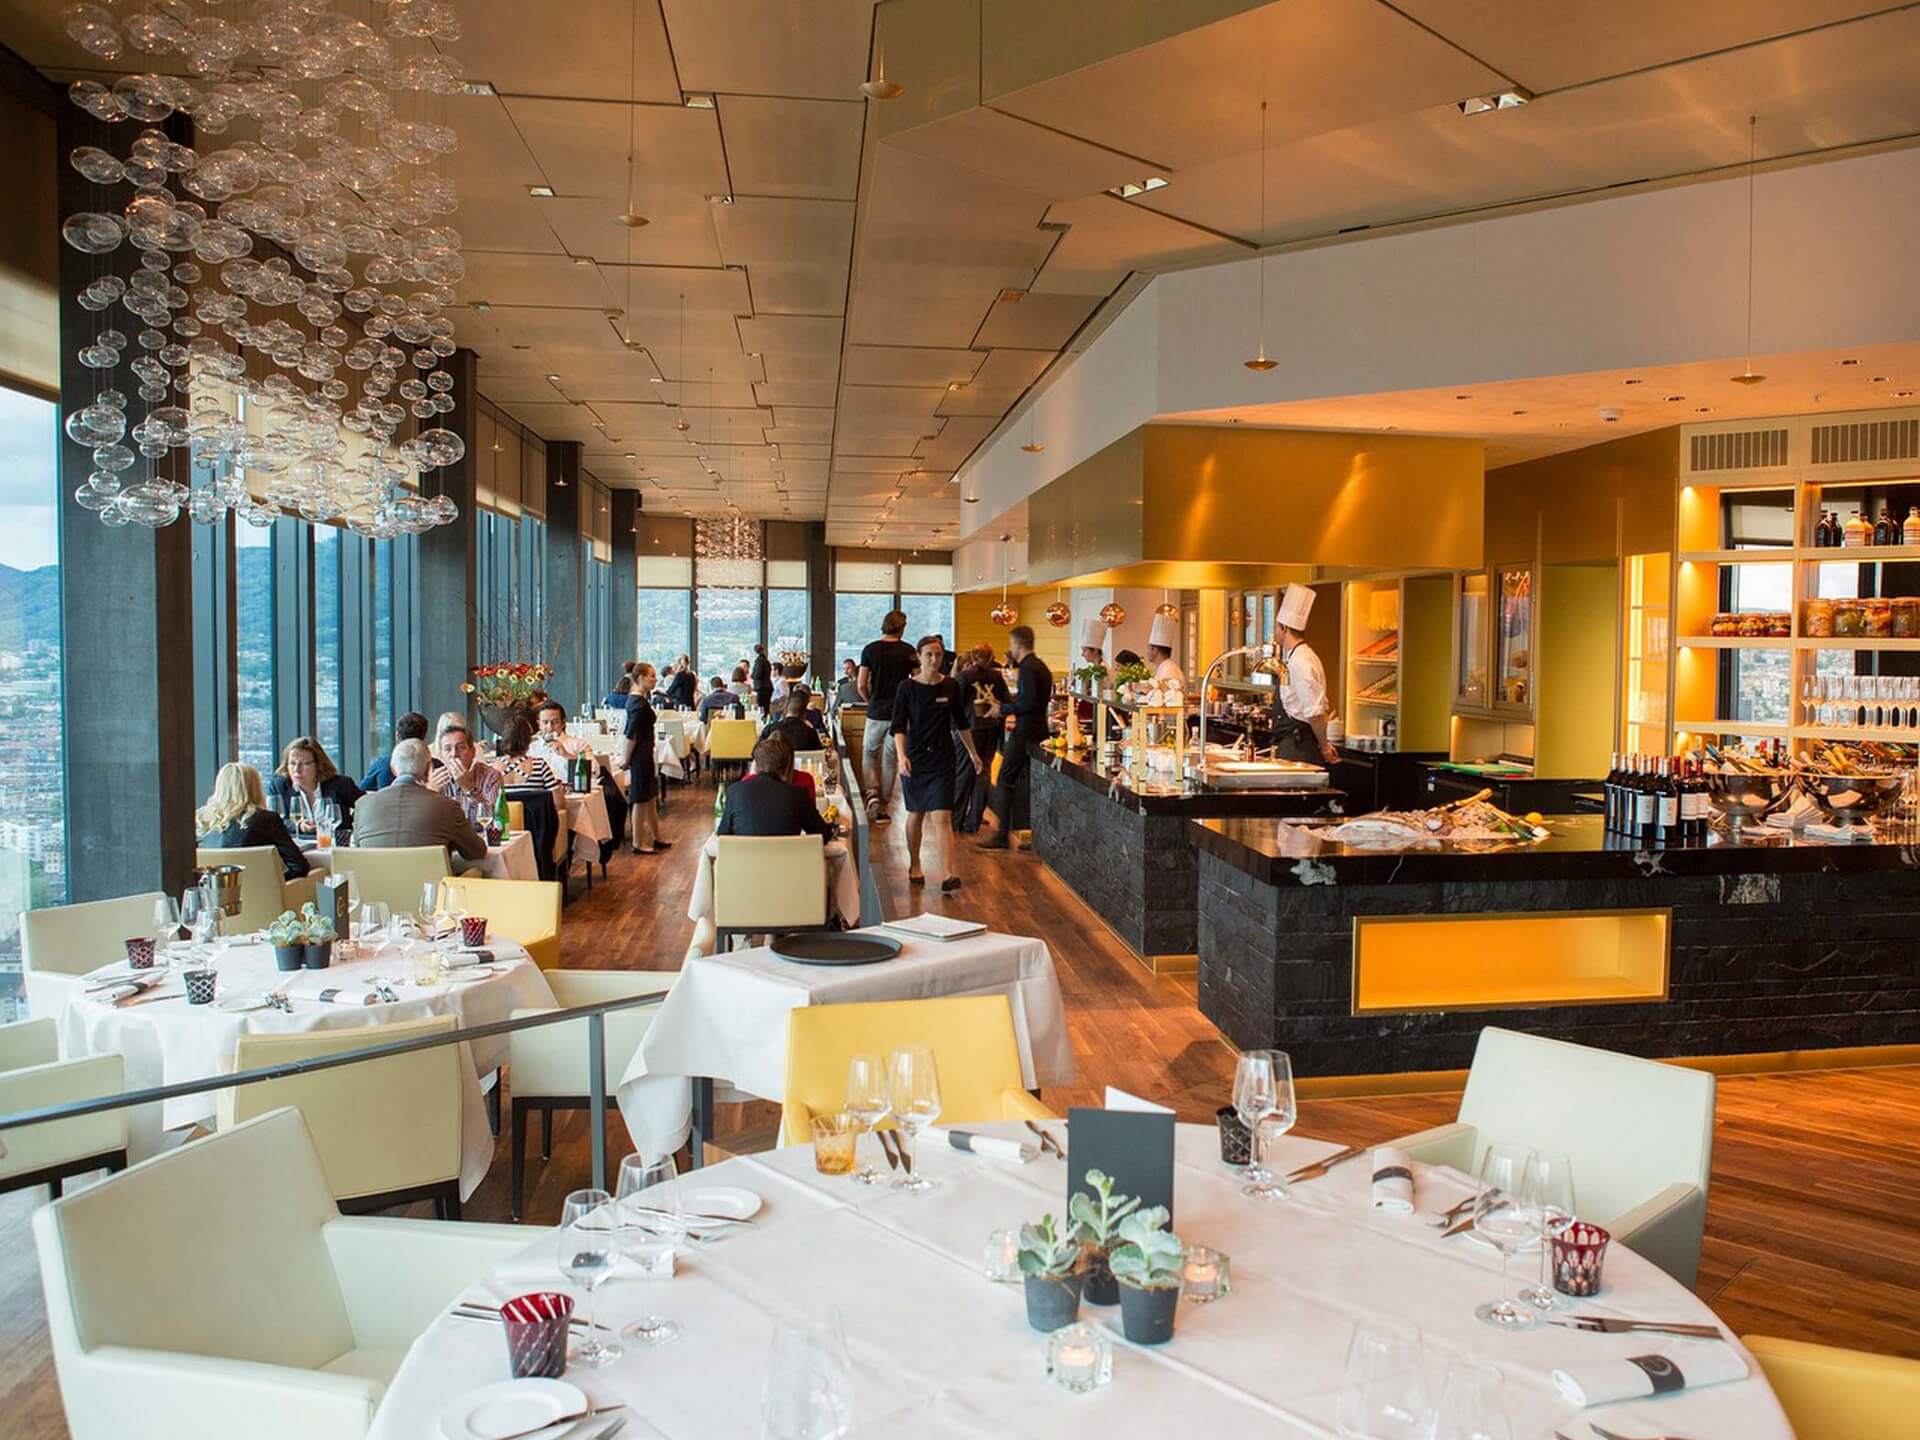 Interior view of the panoramic restaurant called Clouds in Zurich